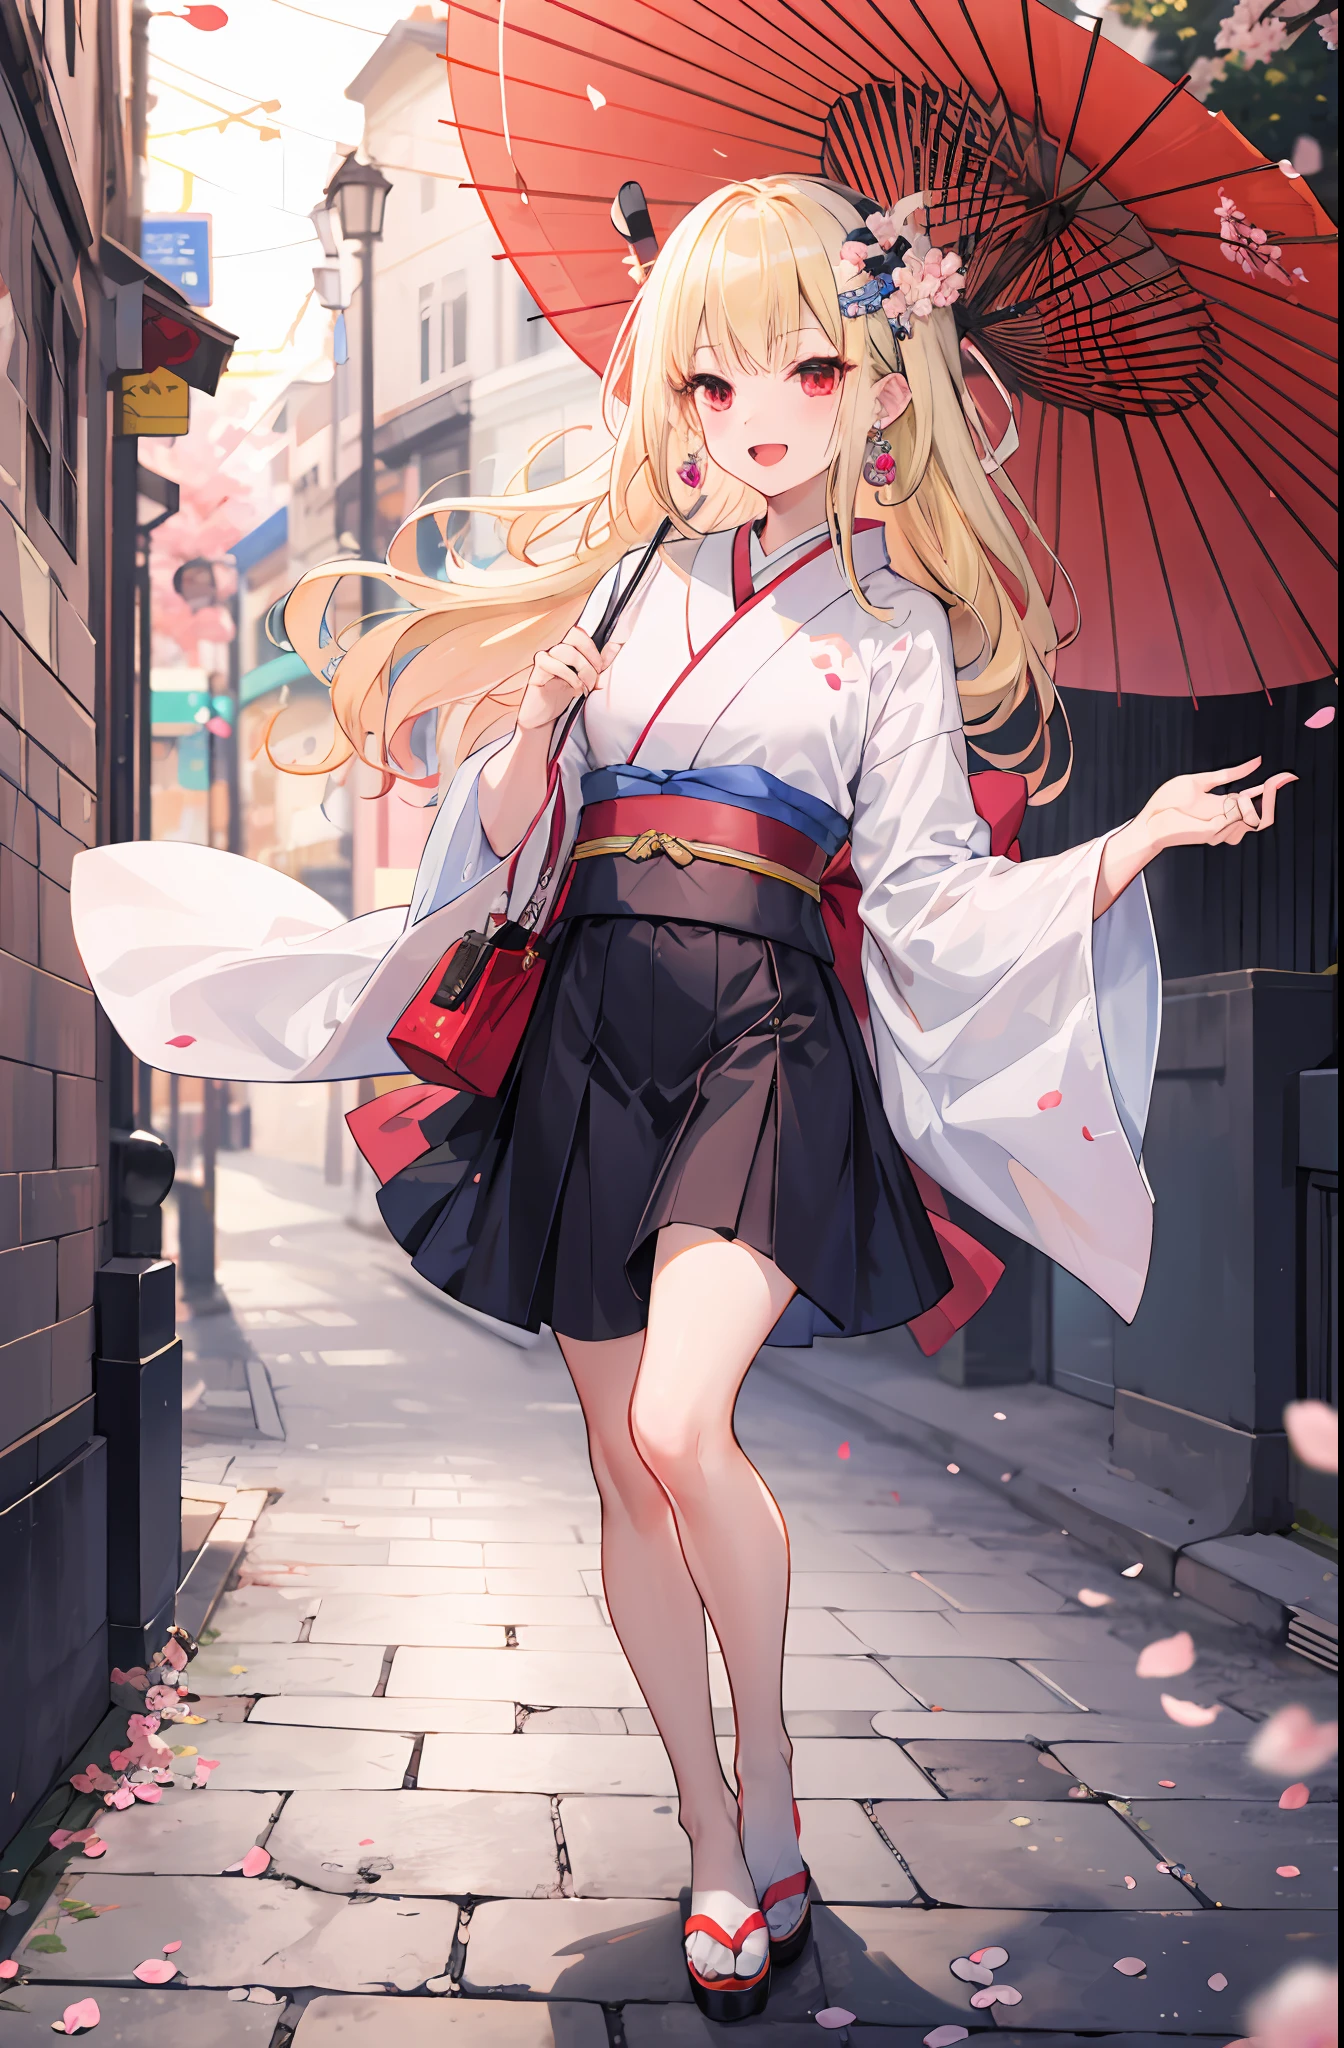 masterpiece, top quality, full body,
girl in kimono, bangs, blonde hair, blue skirt, ear piercing, eyebrows visible through hair, gradient hair, open mouth and laugh, gal, jewelry, kogal, long hair, look at viewer, piercing, red eyes, ring,smile, solo, hand holding umbrella, stone brick street
sky, cherry blossom, petals, young